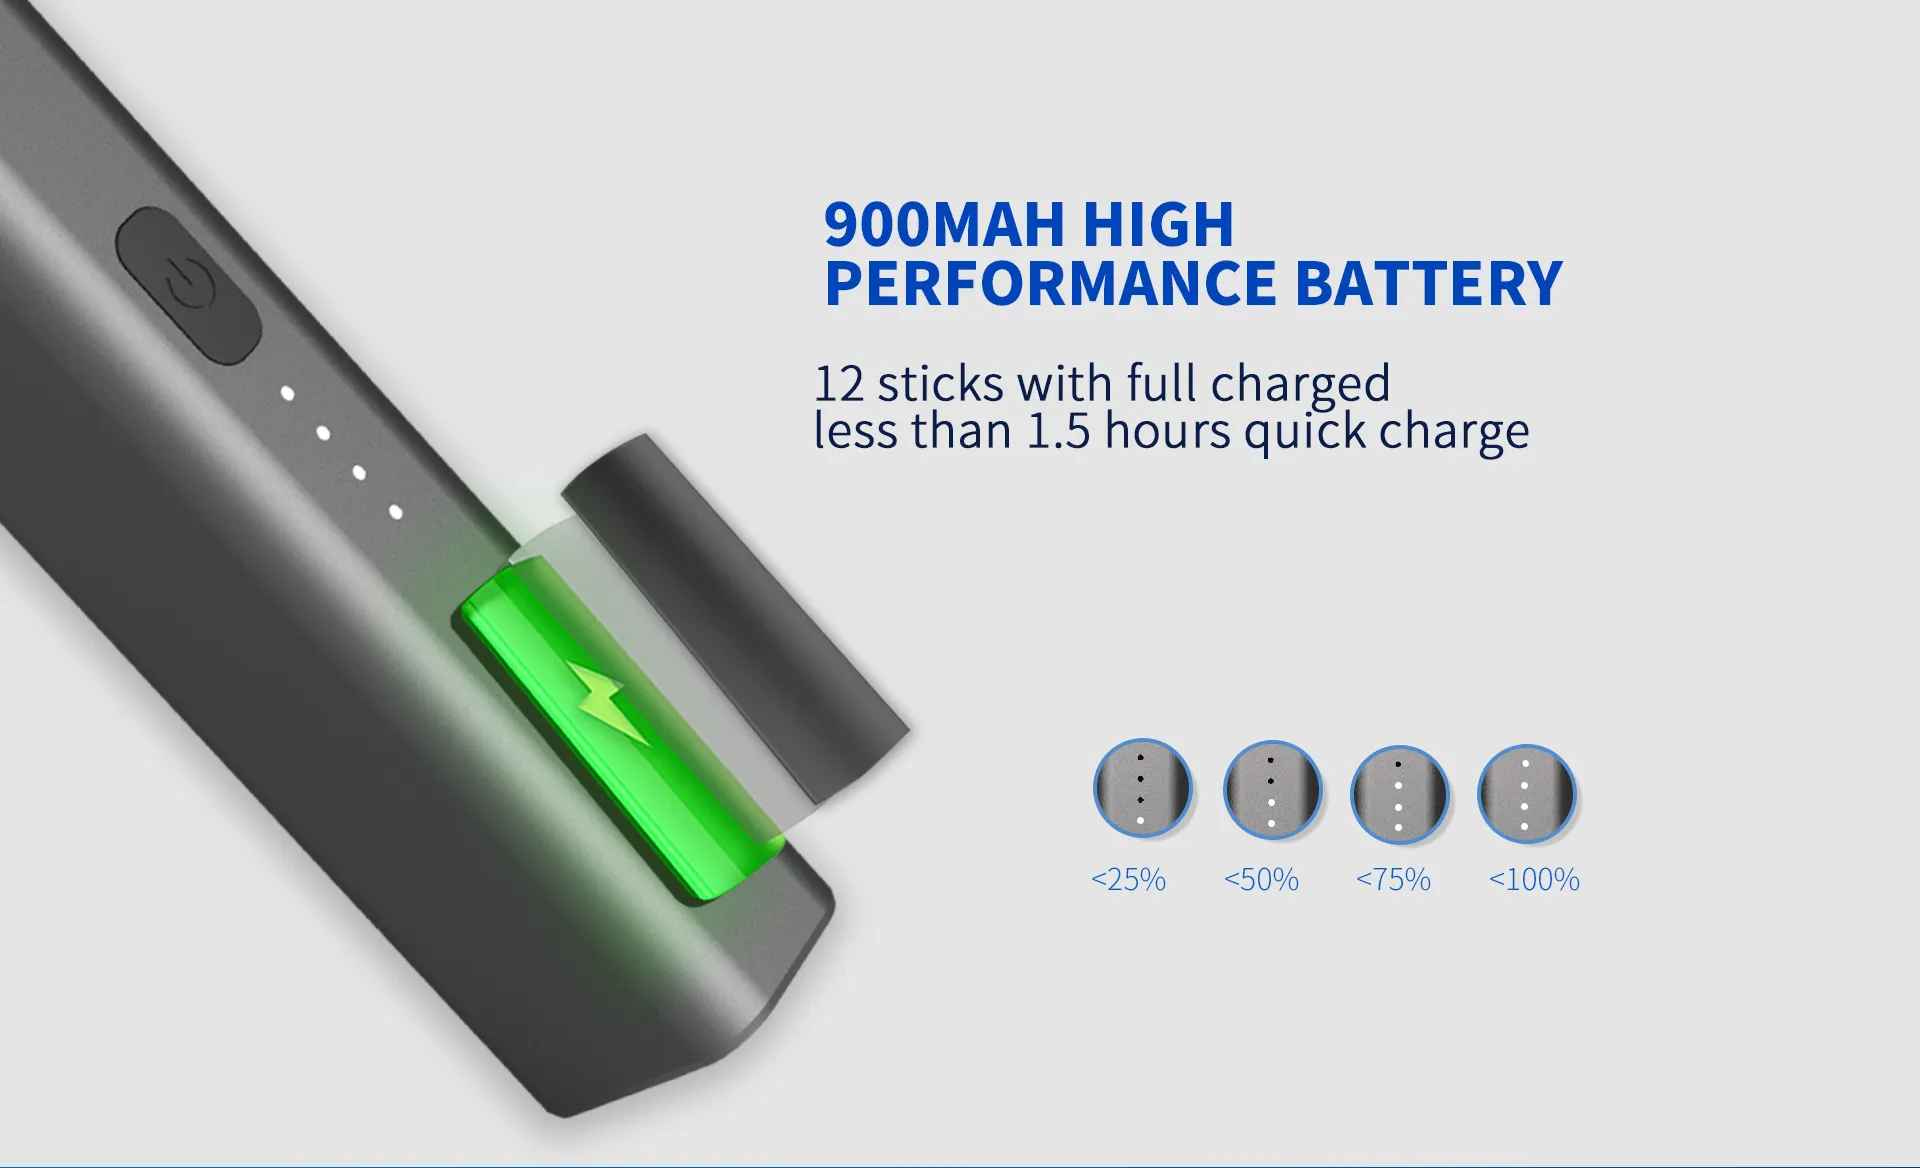 900MAH HIGH PERFORMANCE BATTERY 12 sticks with full charged less than 1.5 hours quick charge